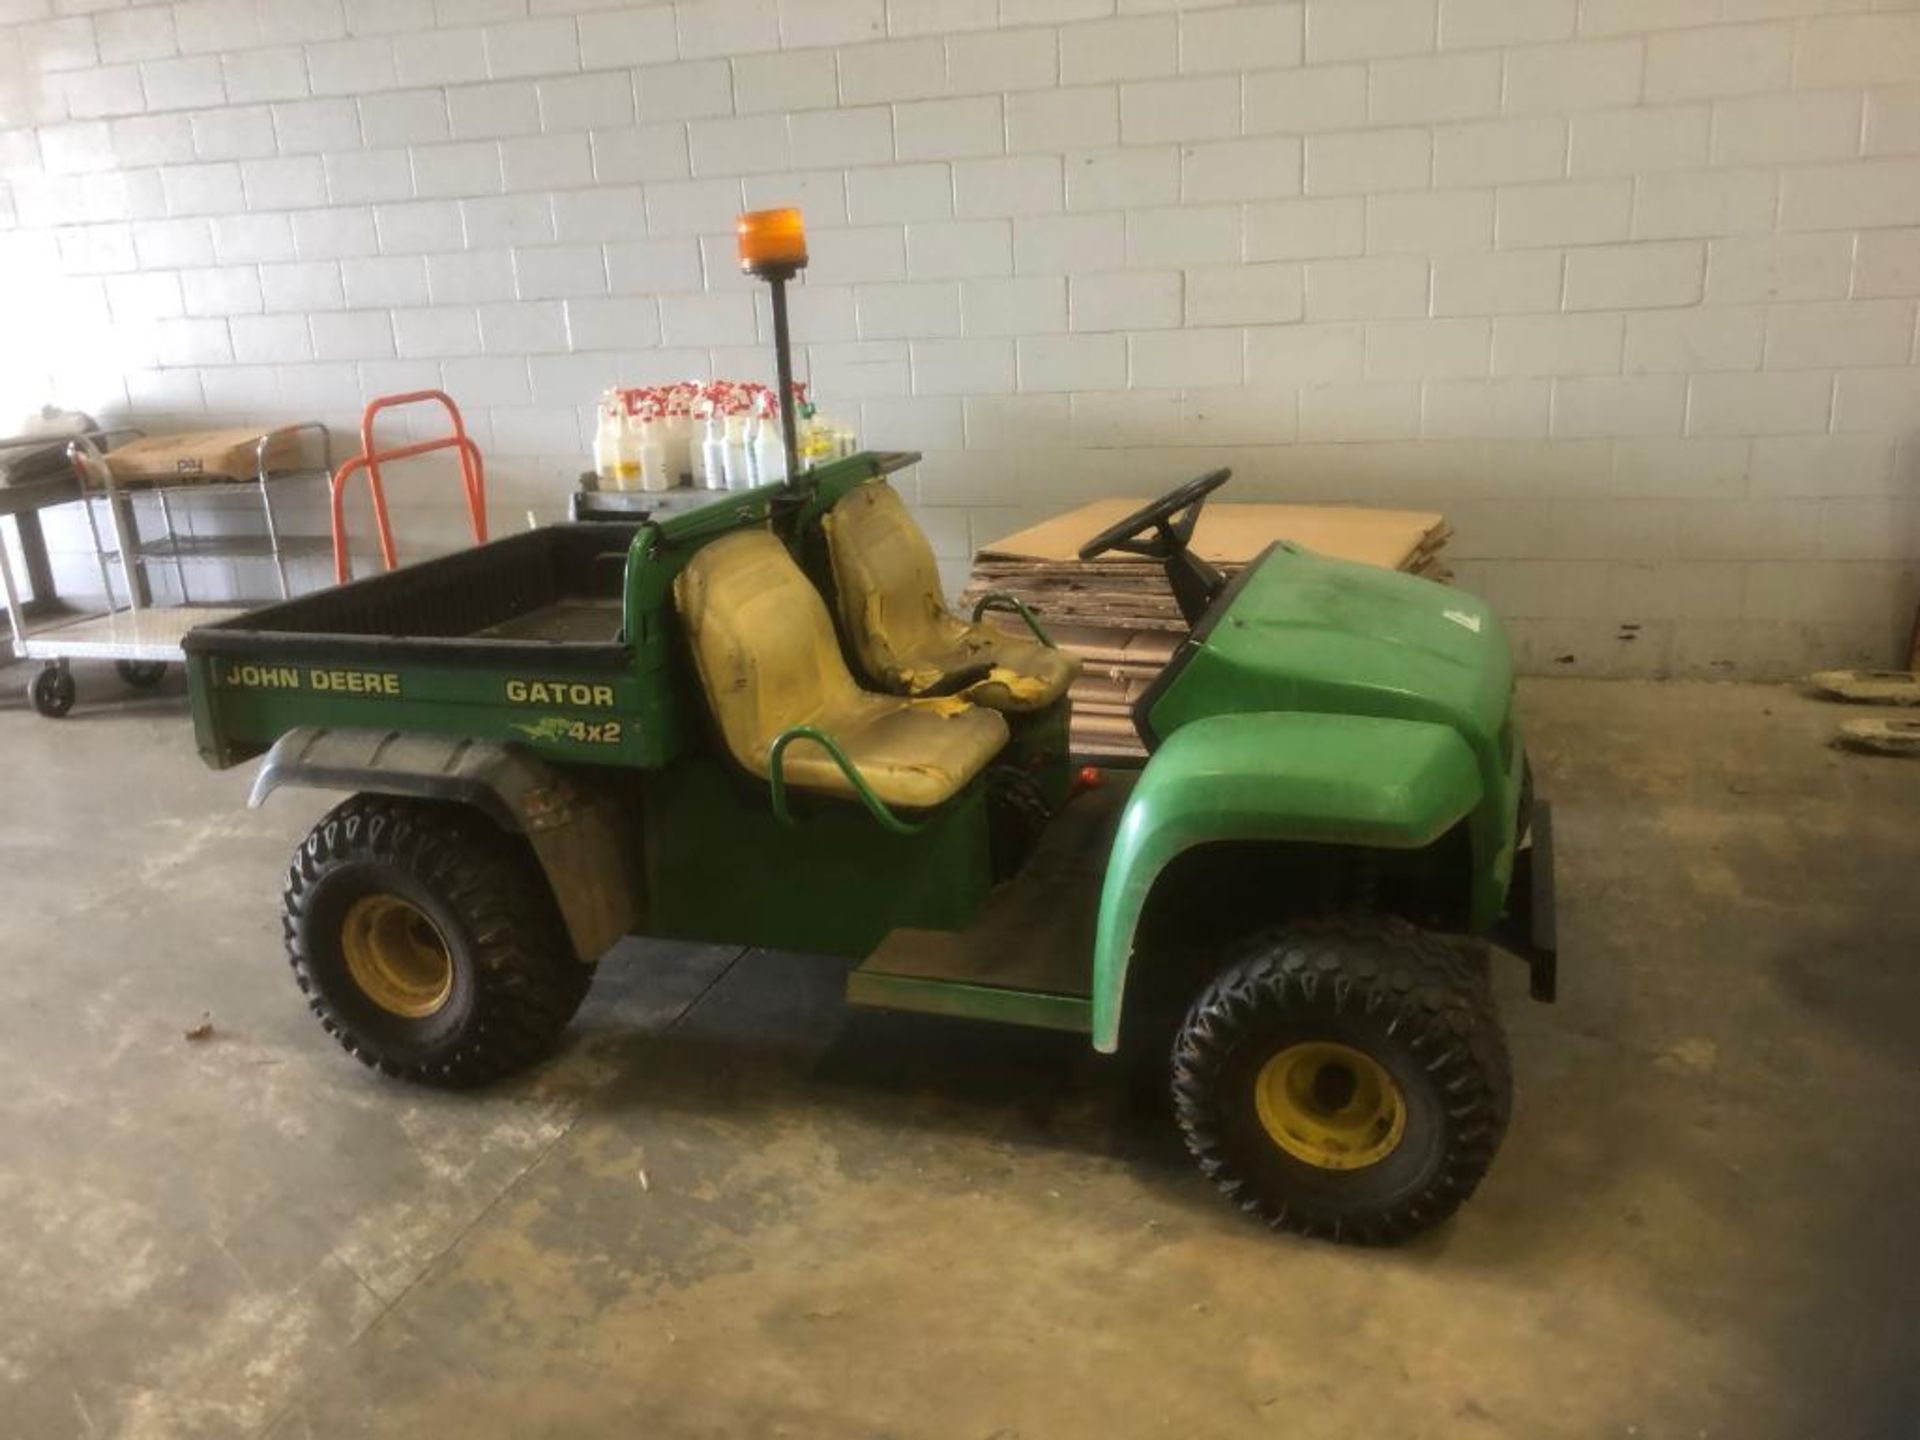 JOHN DEERE GATOR 4X2, DUMP BED, 3,914 HOURS  ***DELAYED REMOVAL UNTIL AUGUST 1ST, BUYER WILL BE